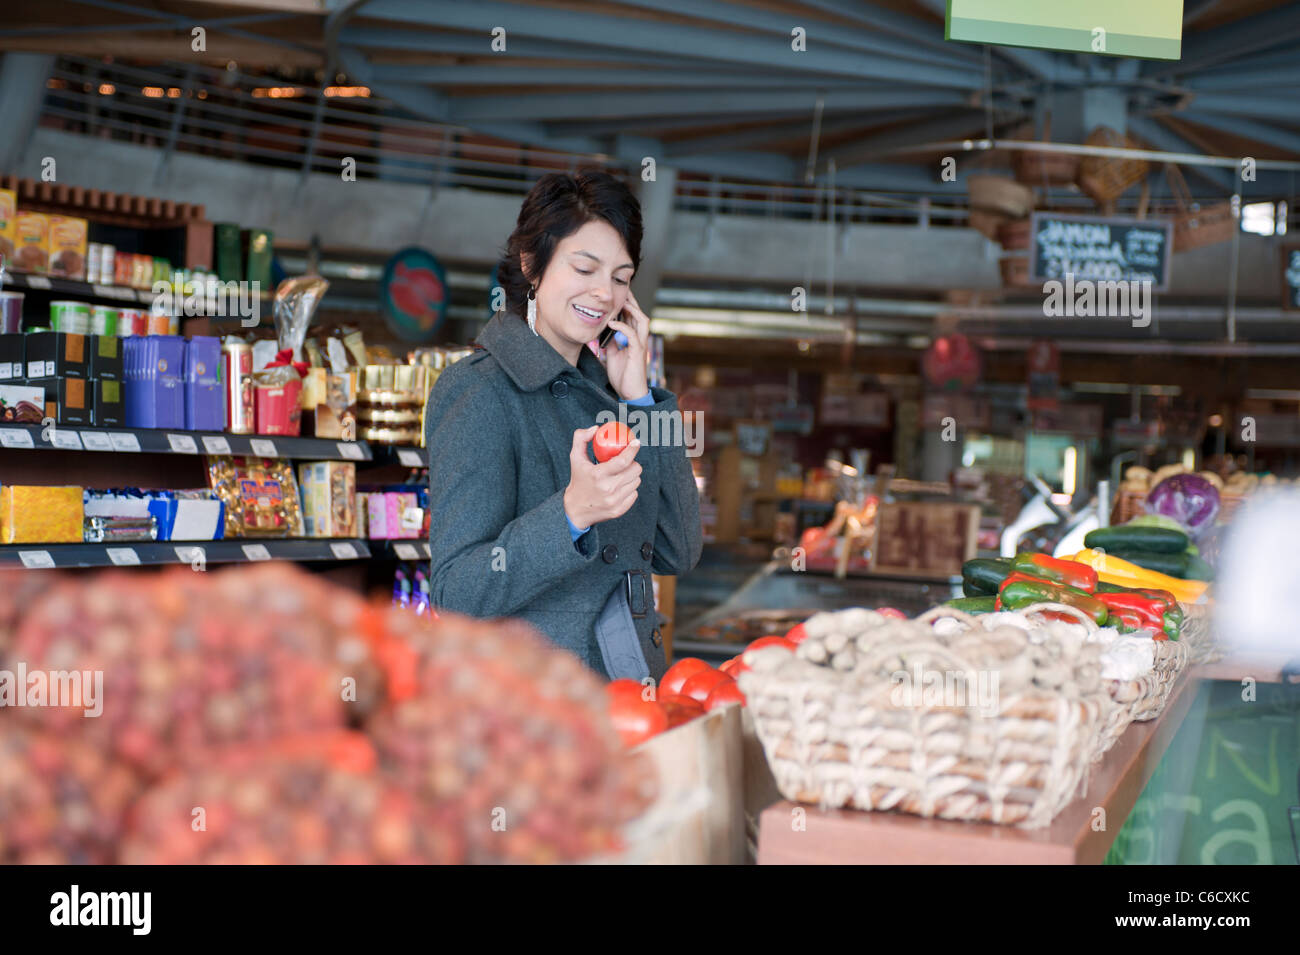 Hispanic woman talking on cell phone and shopping in grocery store Stock Photo